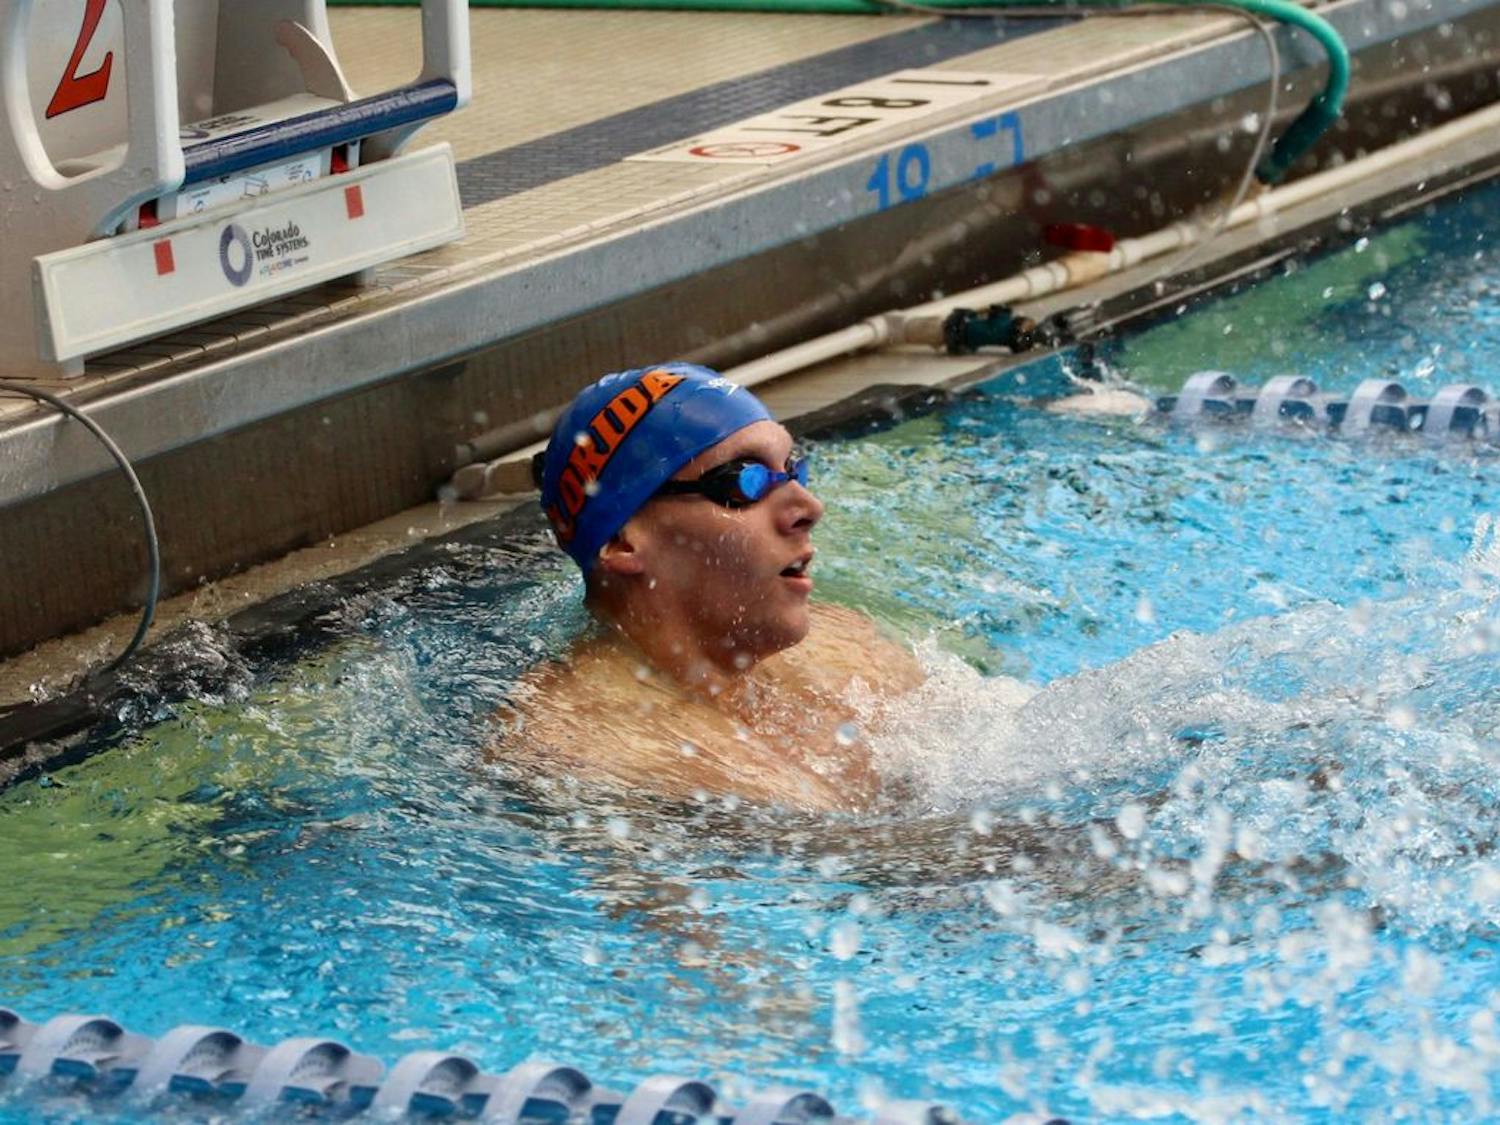 Florida senior Caeleb Dressel finished his career with a bang at the NCAA Championships, breaking American, NCAA and UF records in the 50 free, 100 free and 100 fly.